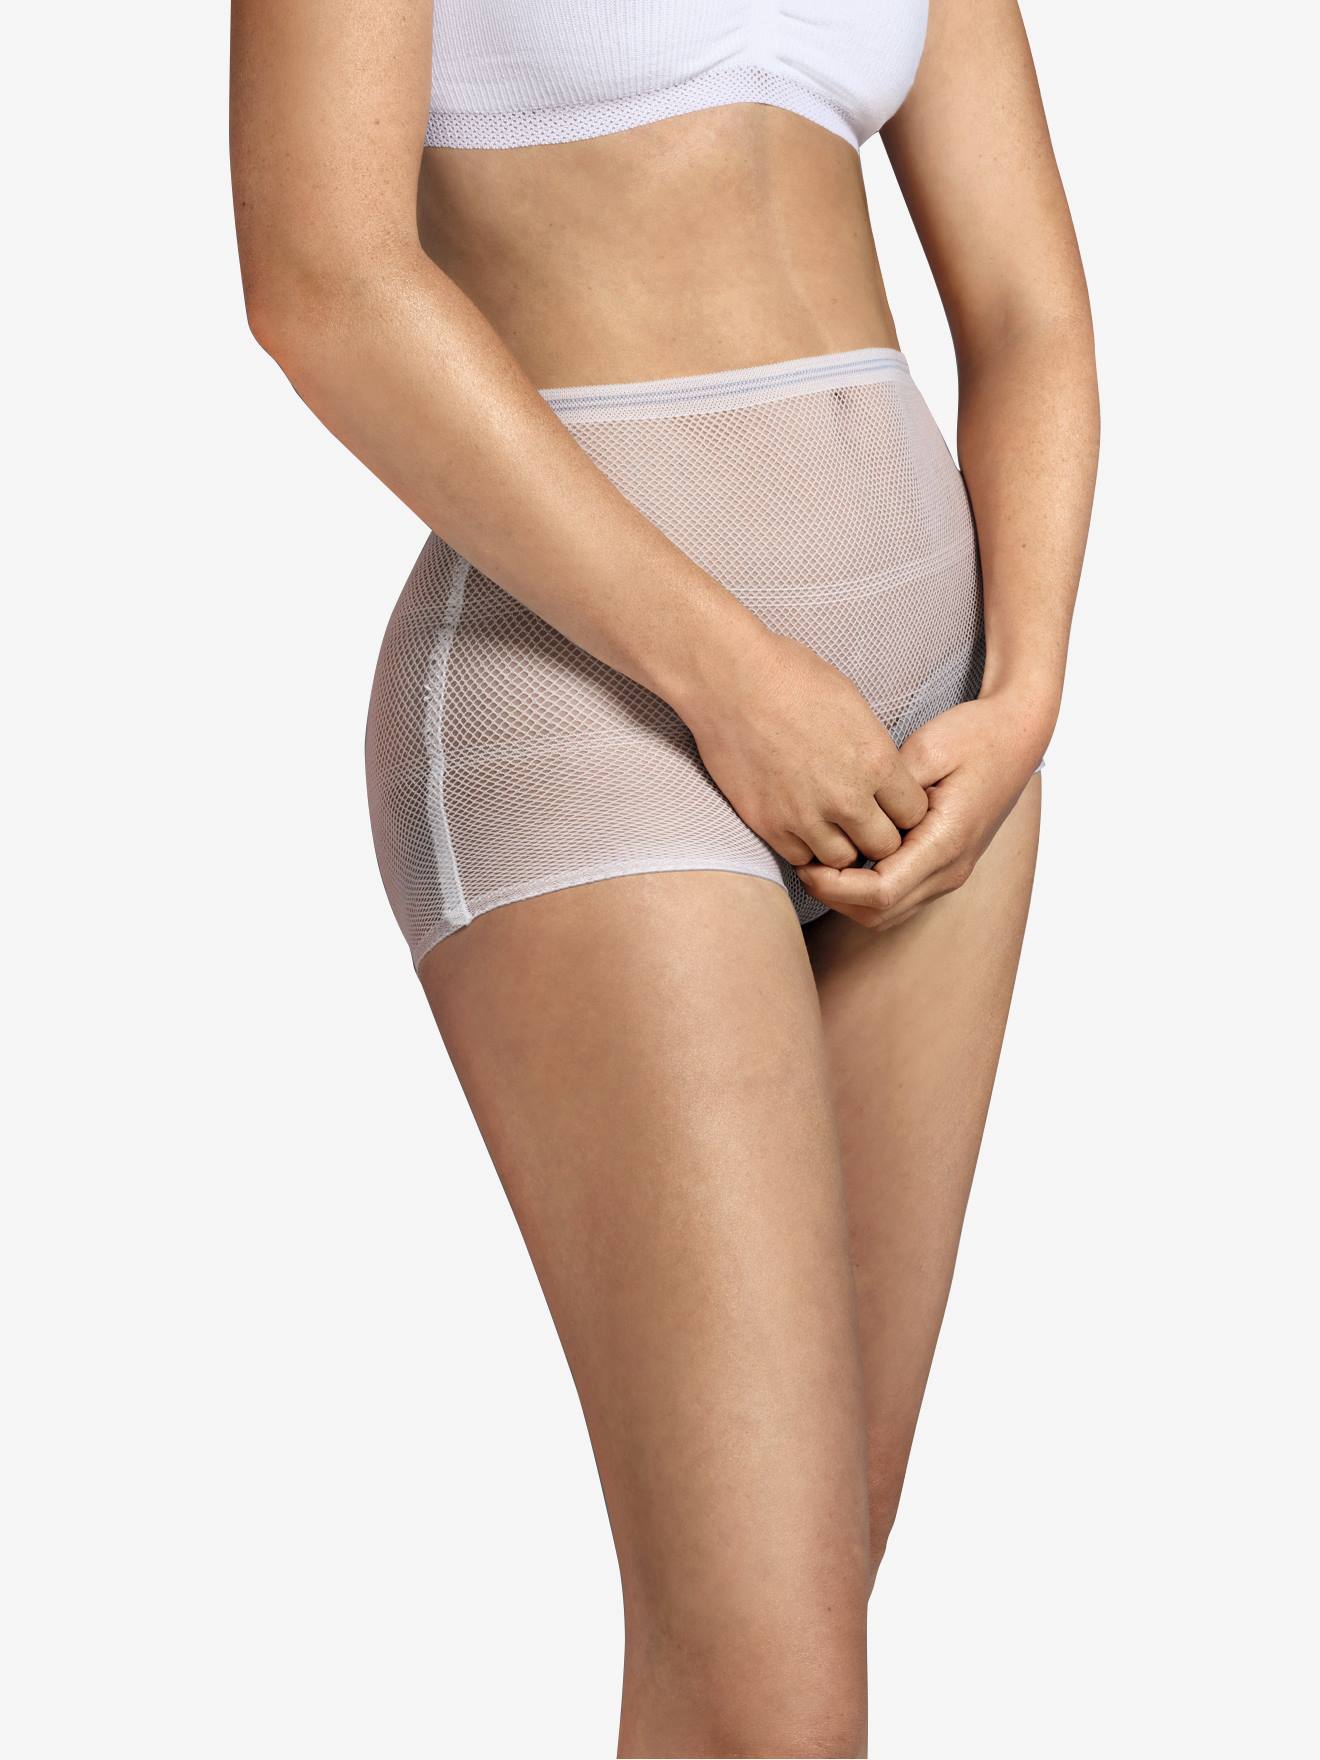 disposable knickers plus size